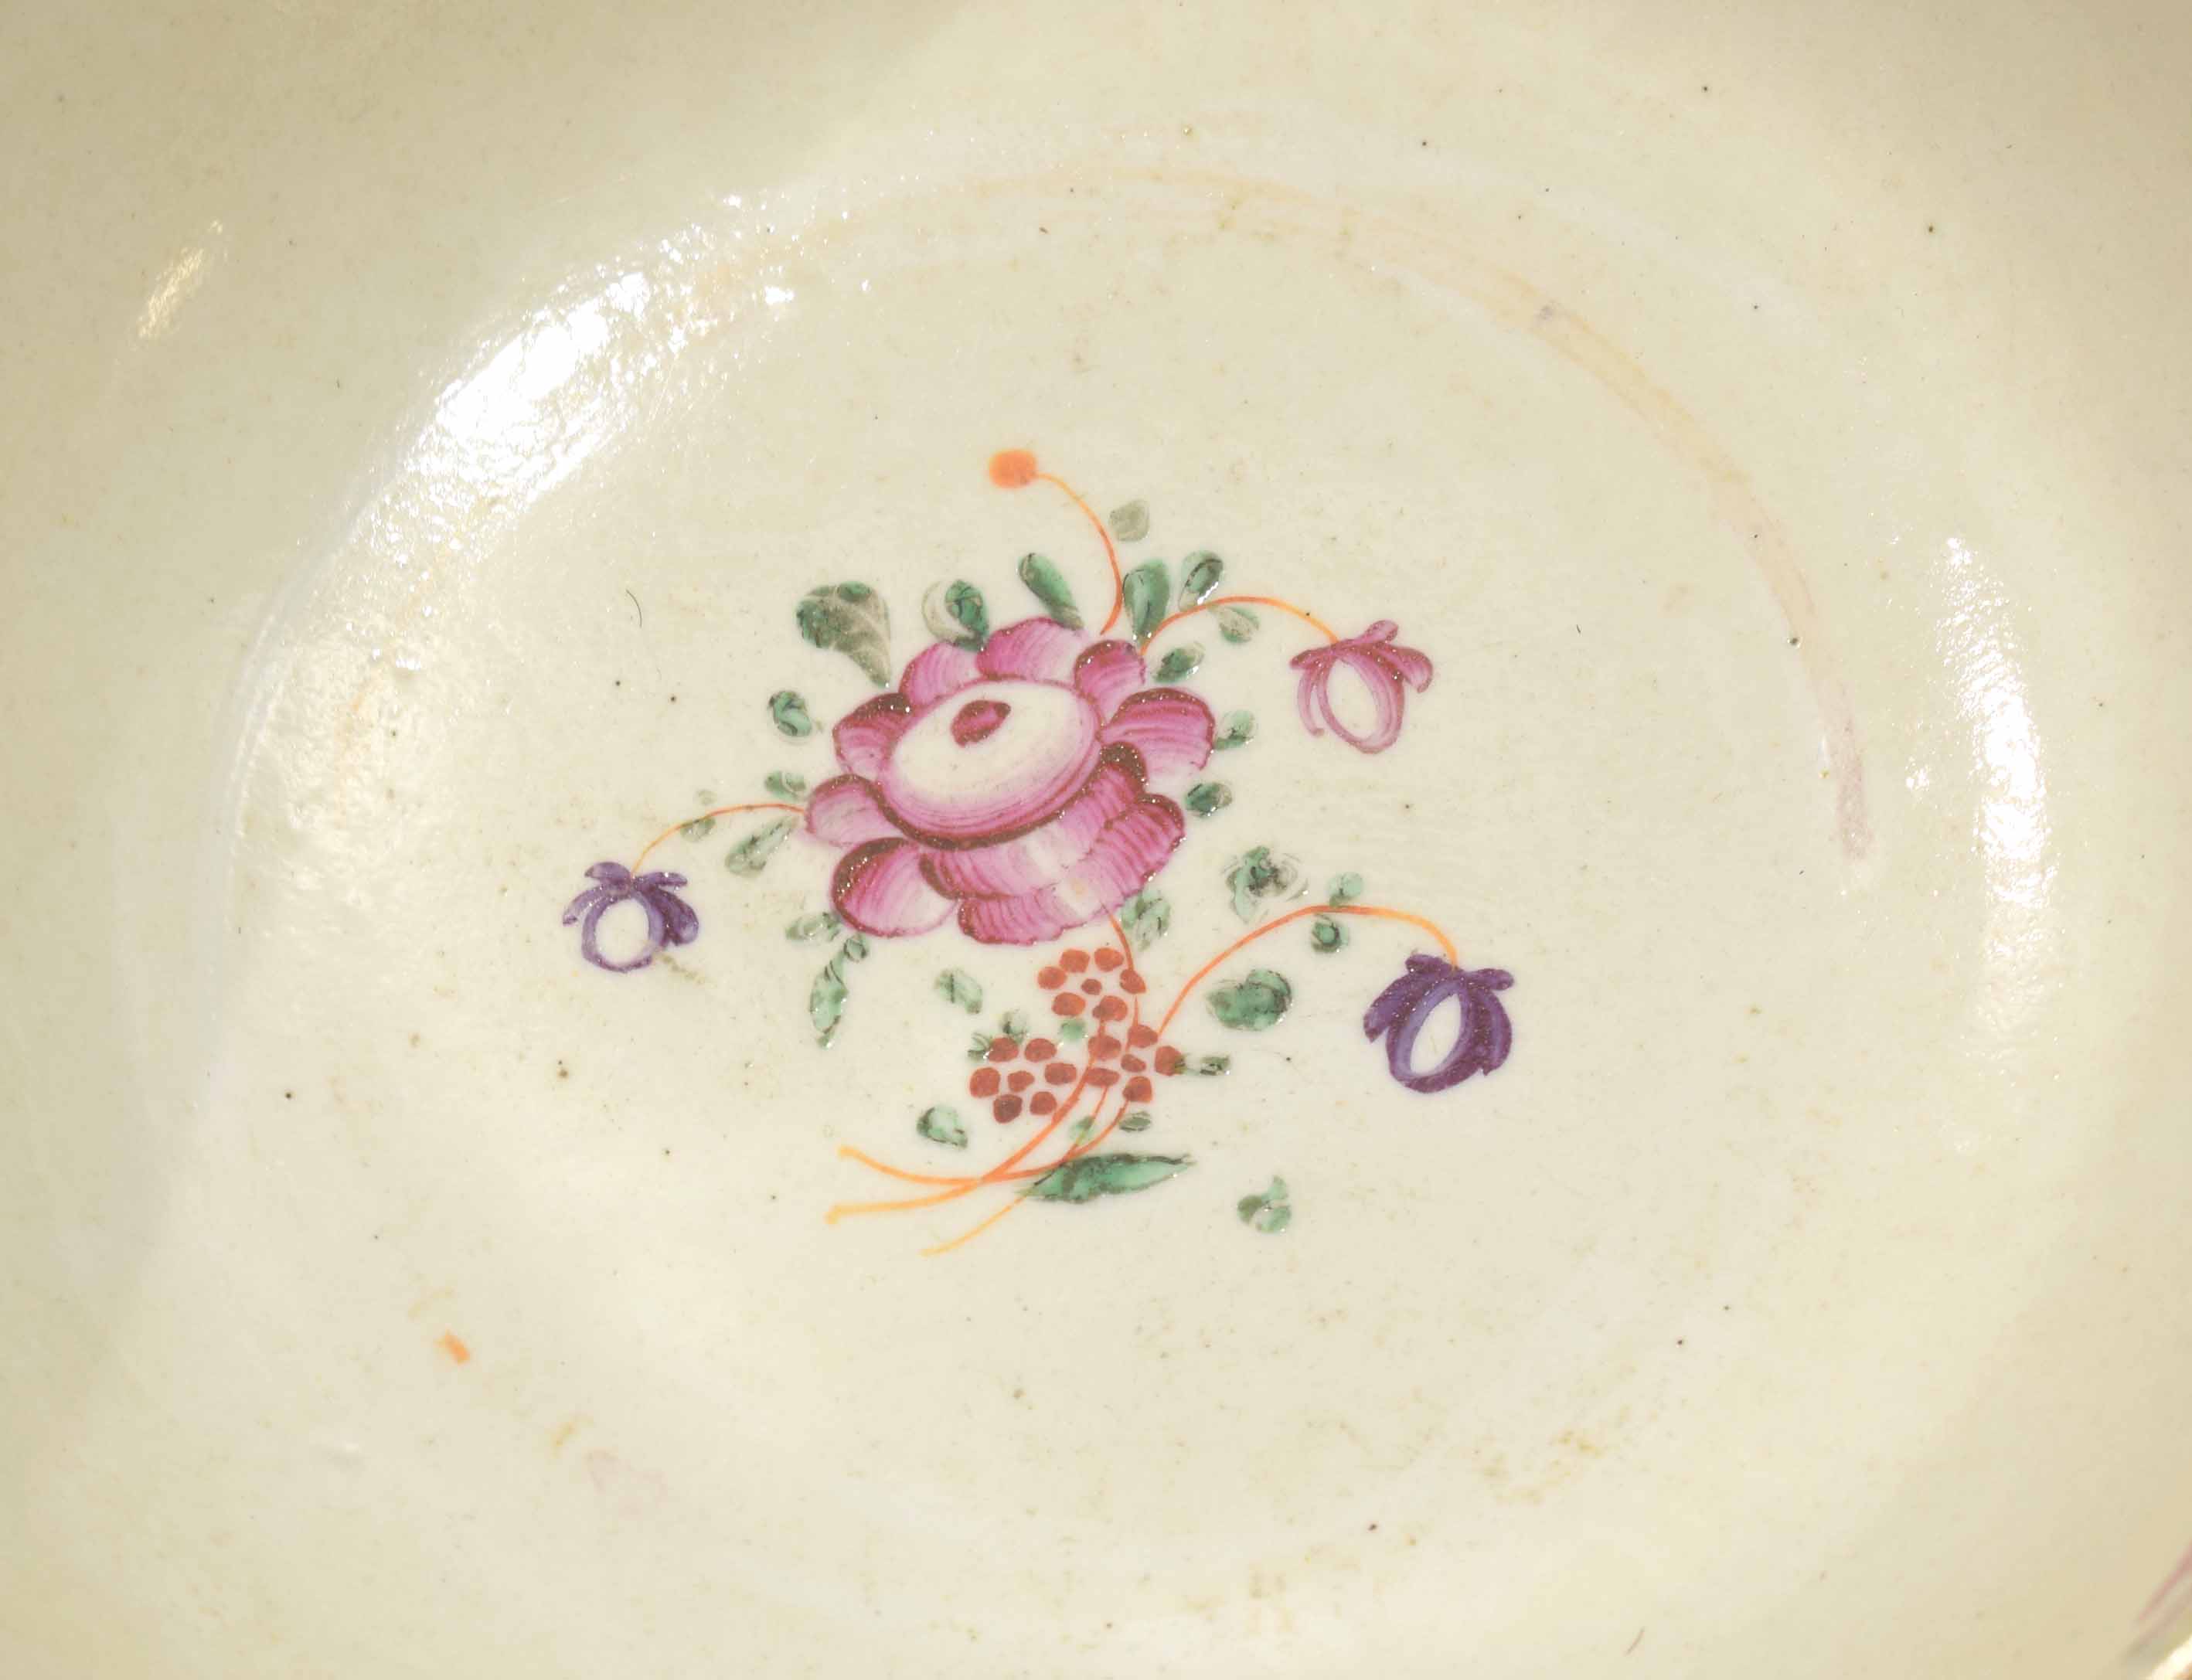 Late 18th century Chinese porcelain punch bowl, decorated in polychrome flowers to the exterior - Image 2 of 3